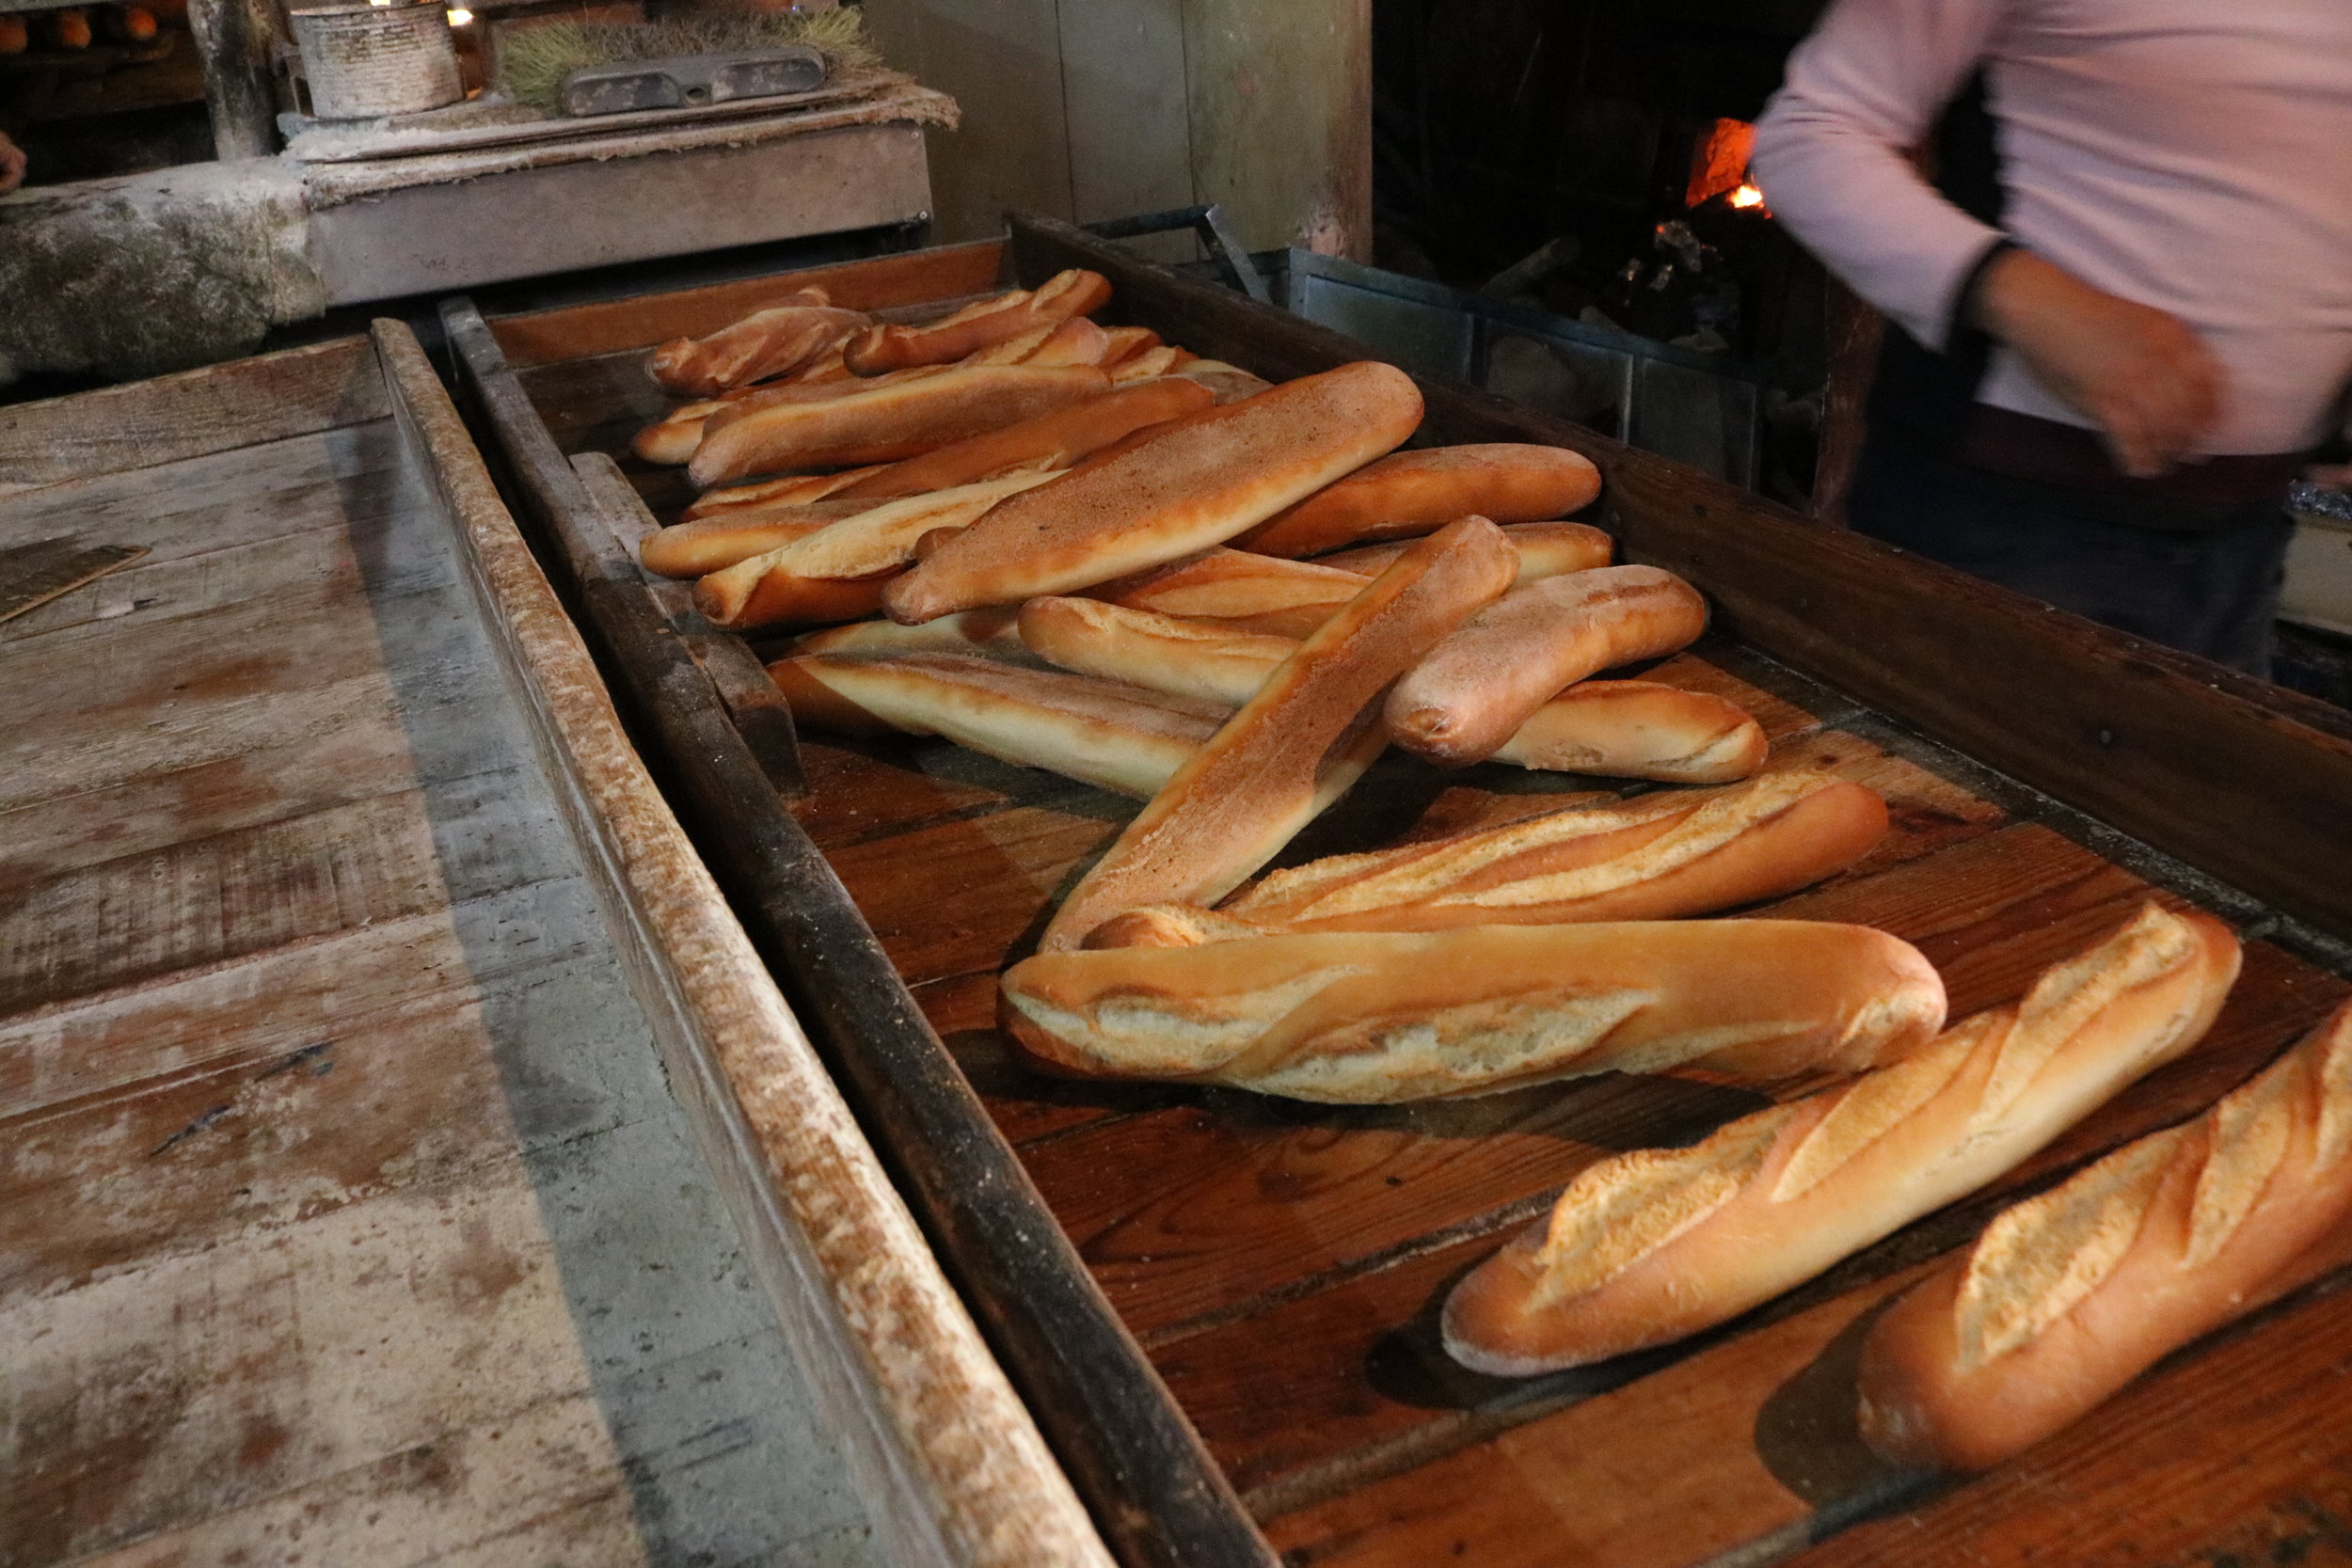 A Moroccan Bakery in Tanger